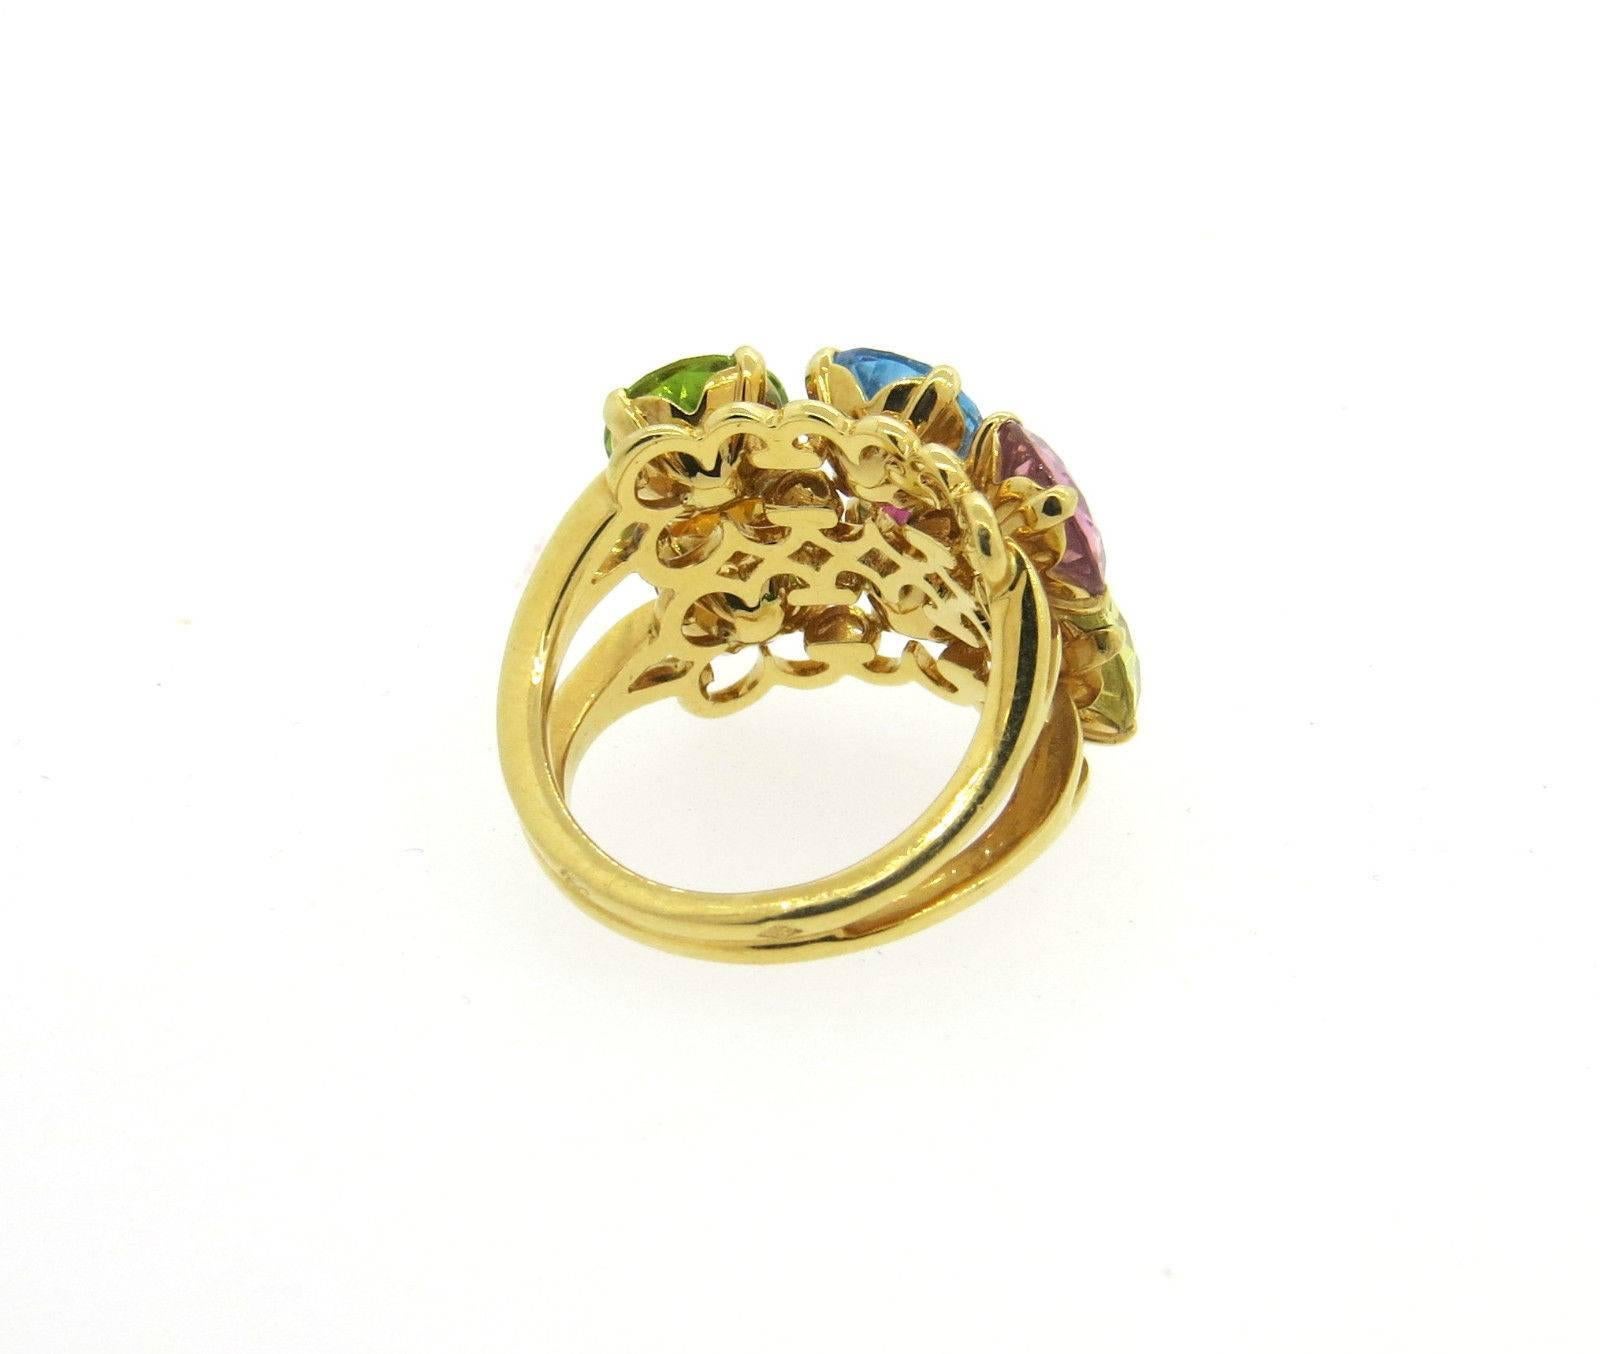 An 18k yellow gold ring set with topaz, peridot, citrine and tourmaline.  Crafted by Christian Dior, the ring is a size 6, ring top is 15mm x 19mm. Marked: 750, Dior, 08109-52.  The weight of the piece is 9.3 grams.